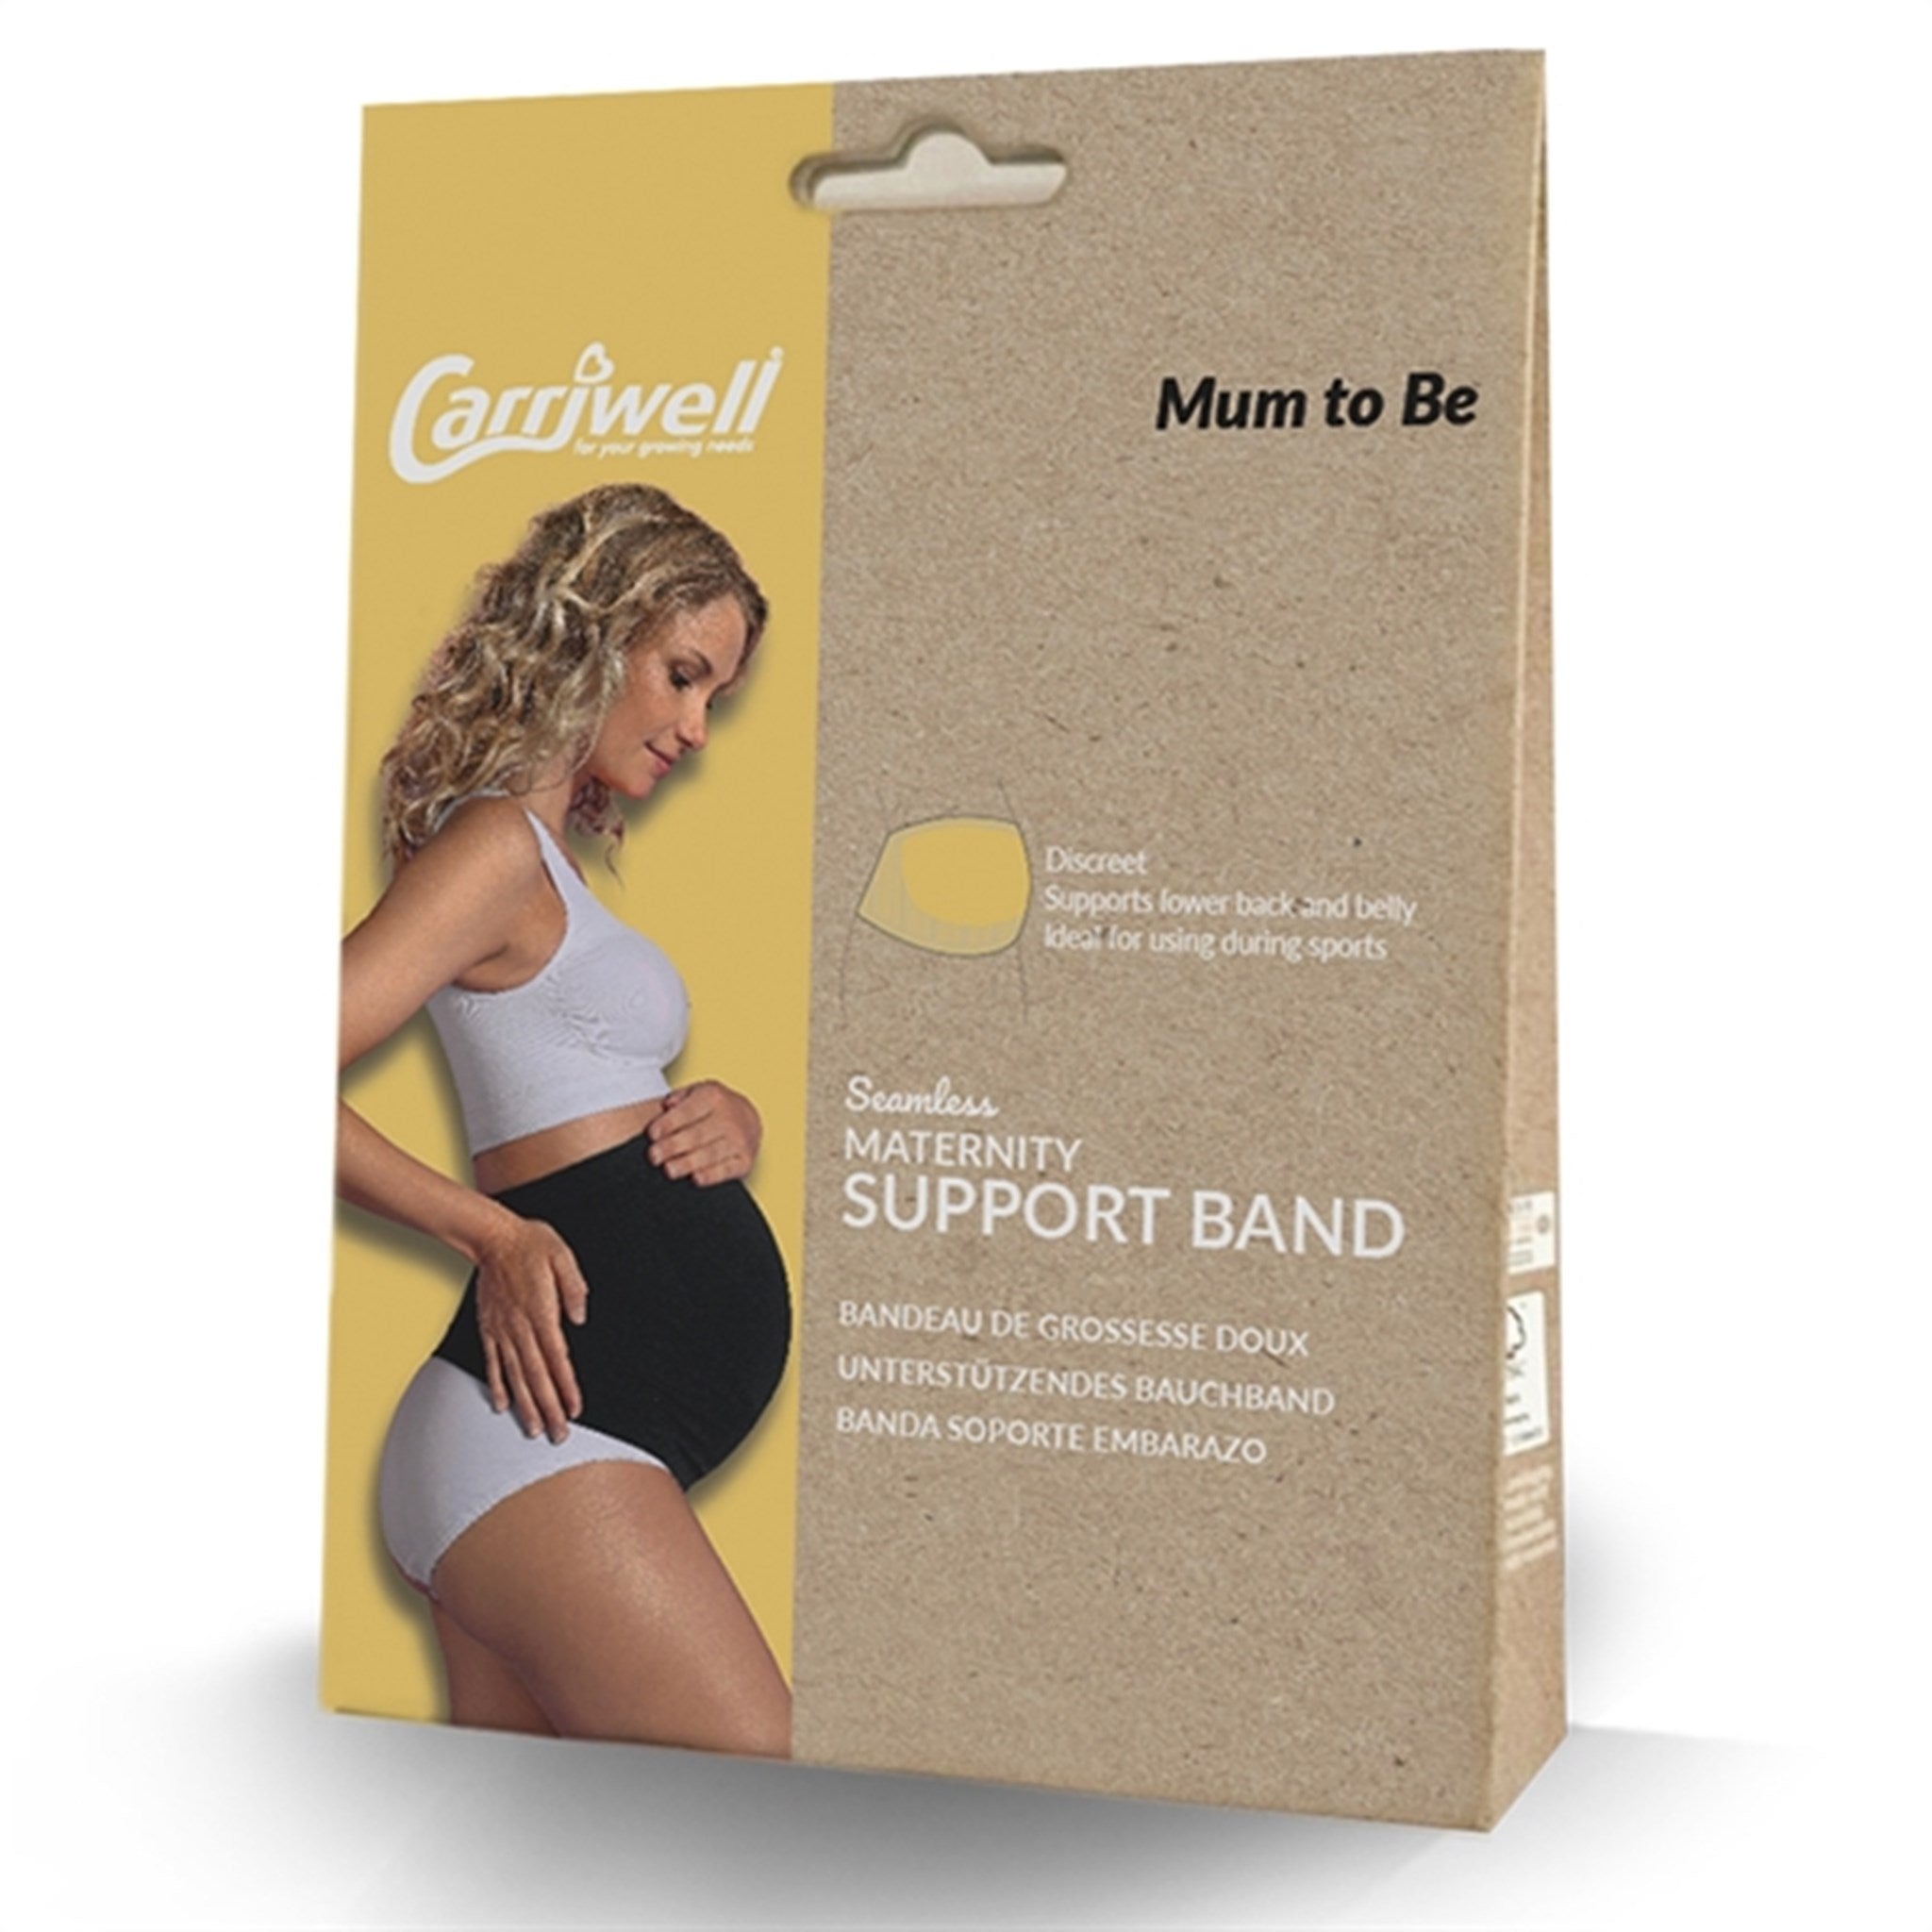 Carriwell Maternity Support Band Black 7